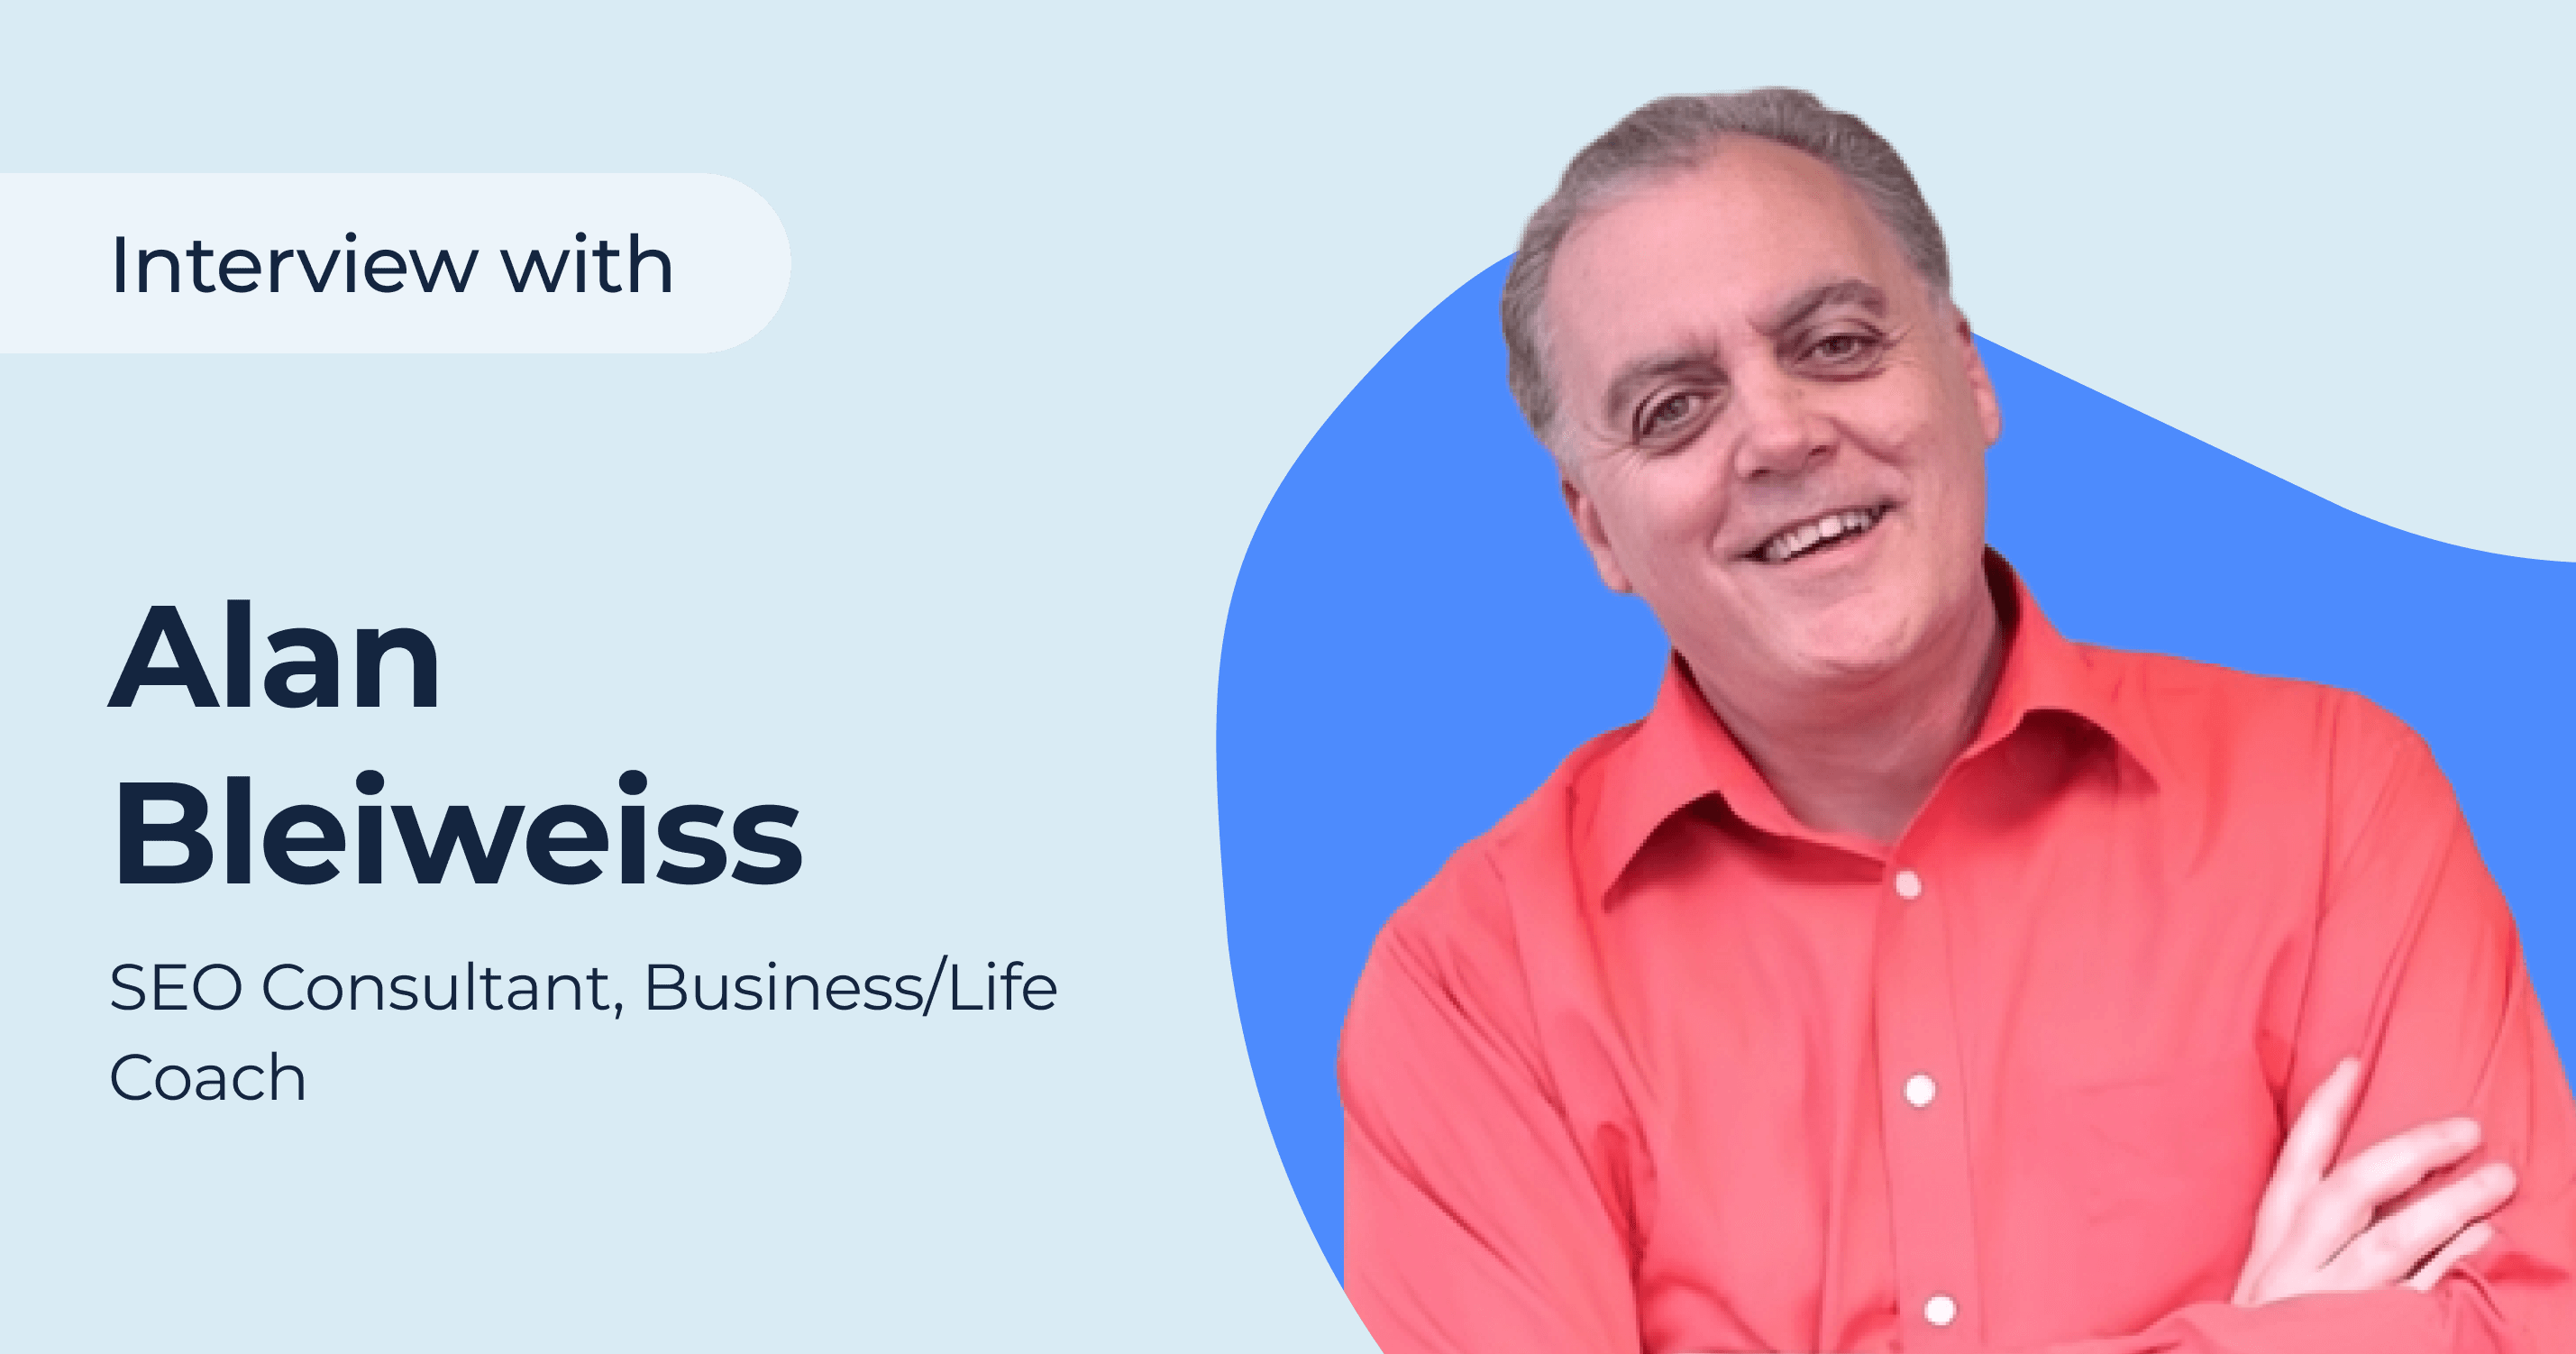 Interview with SEO Consultant, Business/Life Coach Alan Bleiweiss